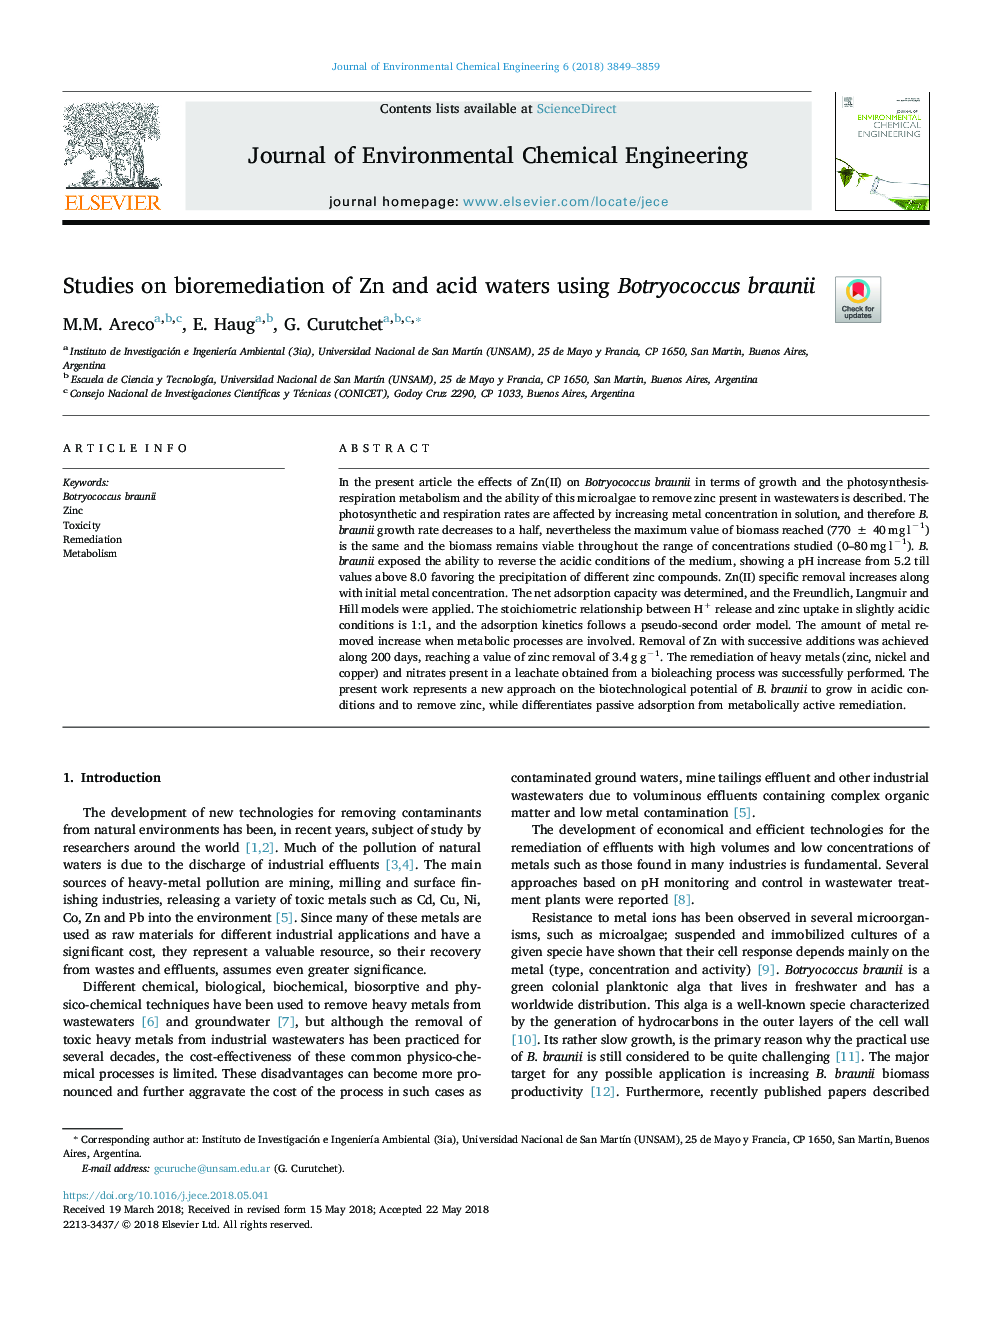 Studies on bioremediation of Zn and acid waters using Botryococcus braunii